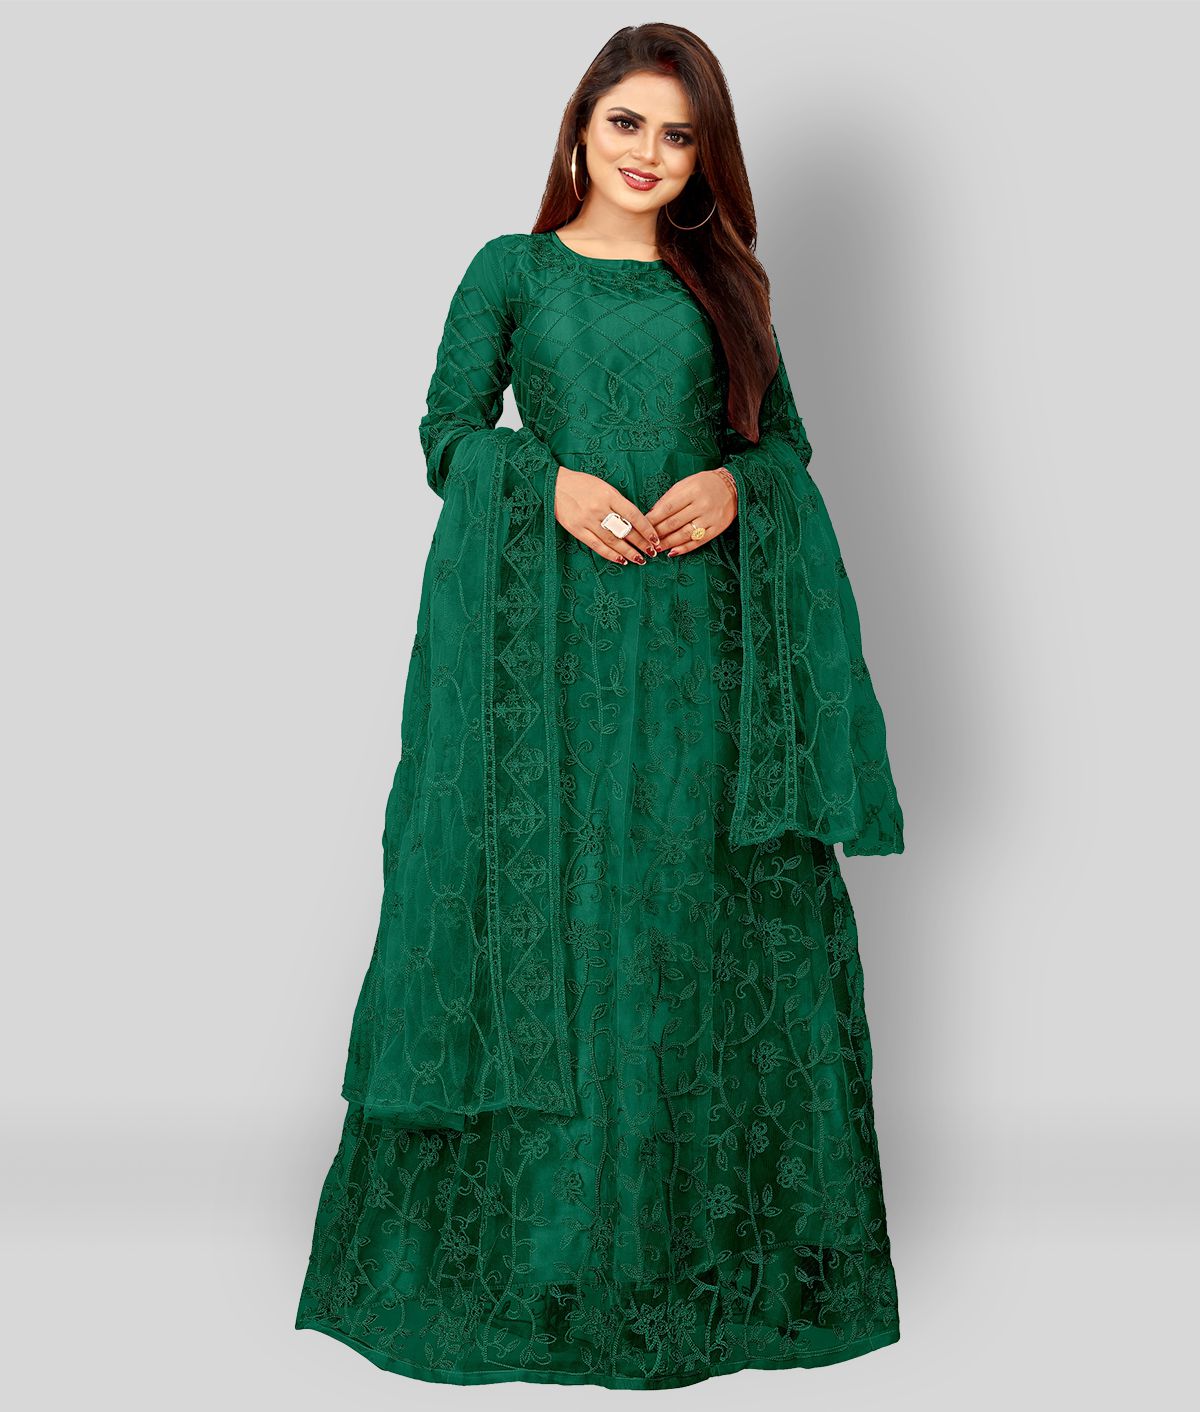     			Aika - Green Anarkali Net Women's Semi Stitched Ethnic Gown ( Pack of 1 )